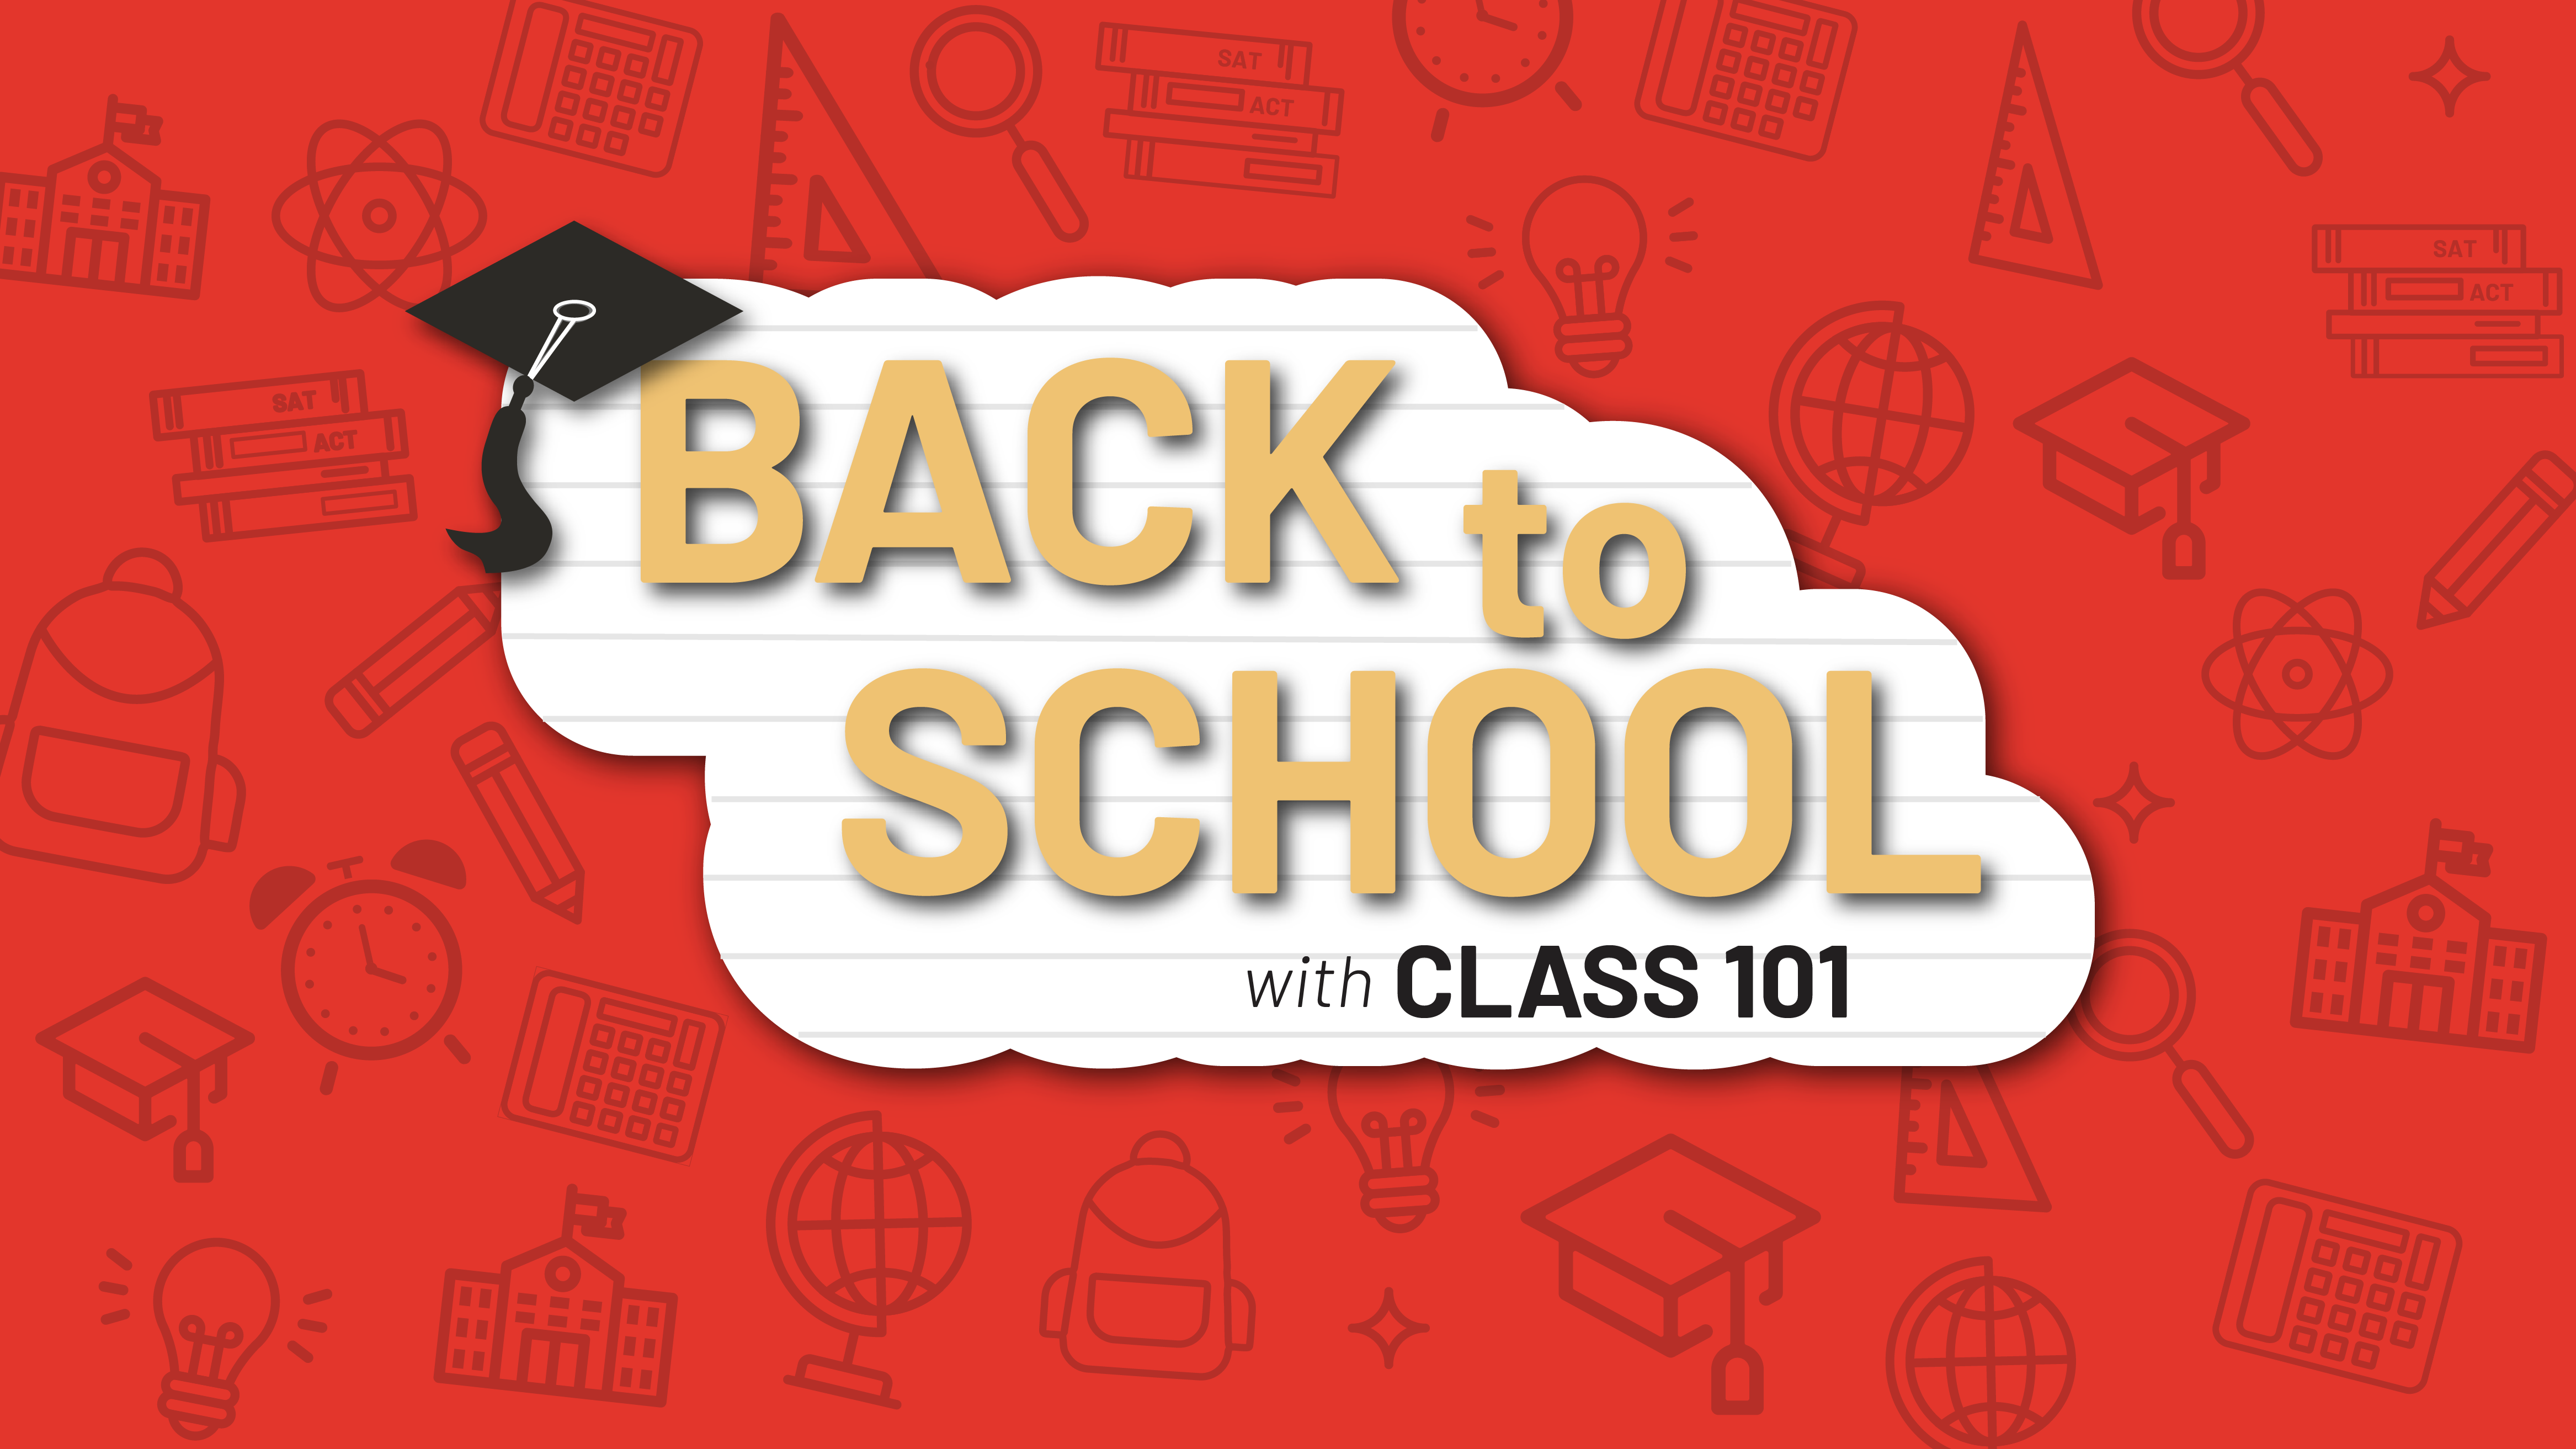 Headed Back to School? Start the New Year Right.